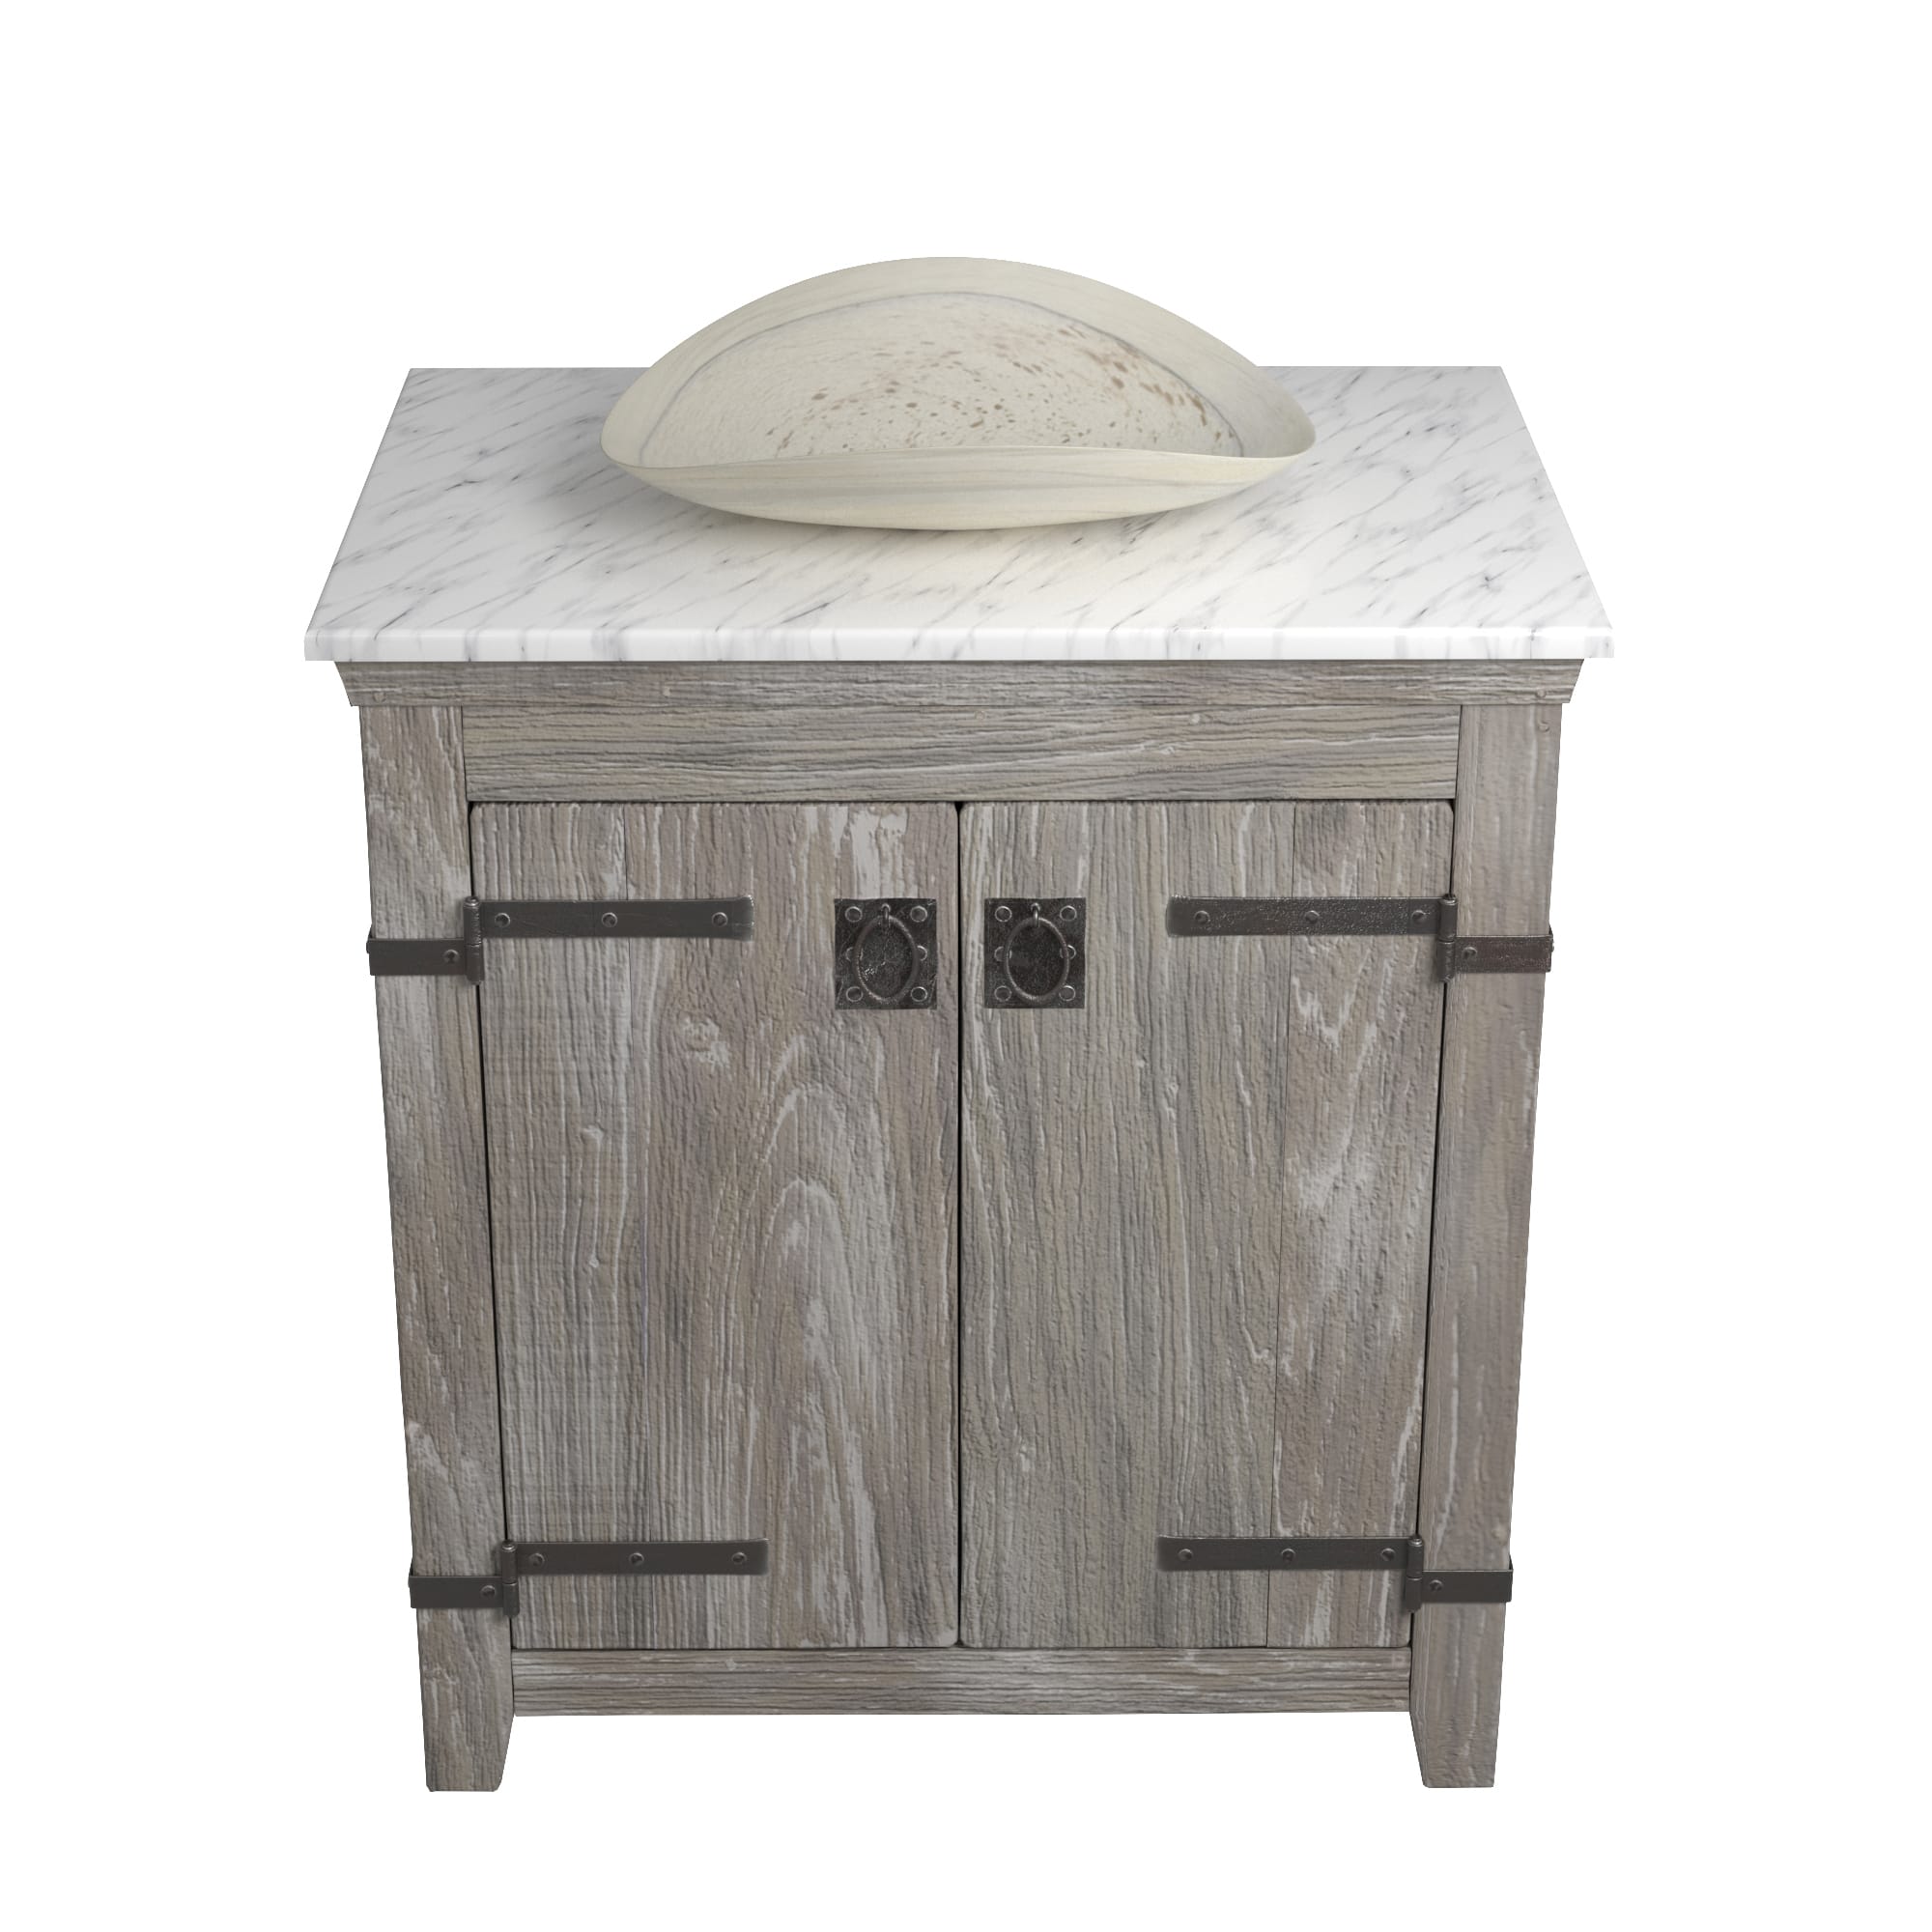 Native Trails 30" Americana Vanity in Driftwood with Carrara Marble Top and Sorrento in Beachcomber, Single Faucet Hole, BND30-VB-CT-MG-111